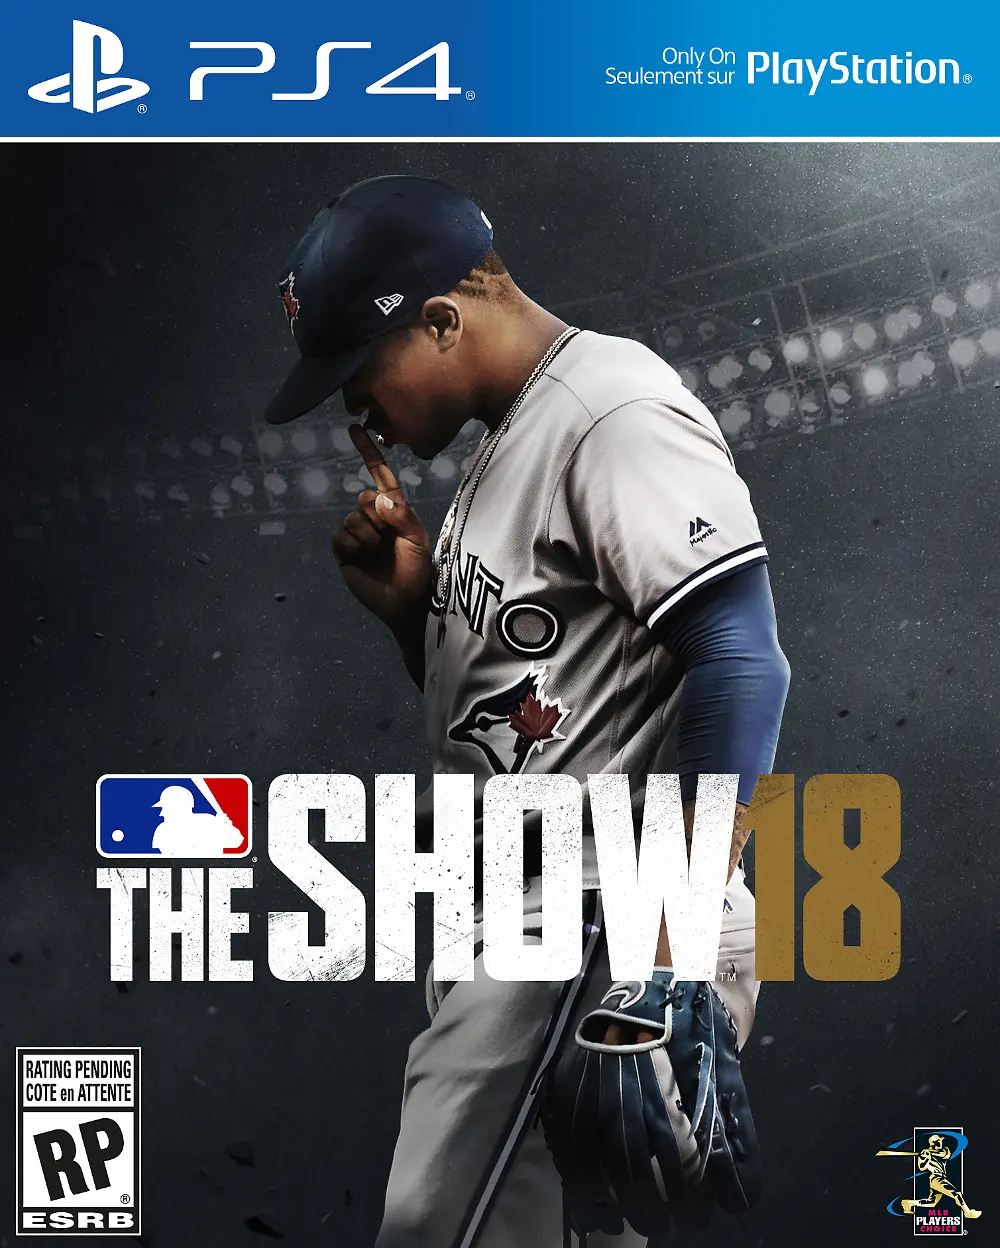 PS4/MLB_18_THE_SHOW MLB The Show 18 - PS4-1